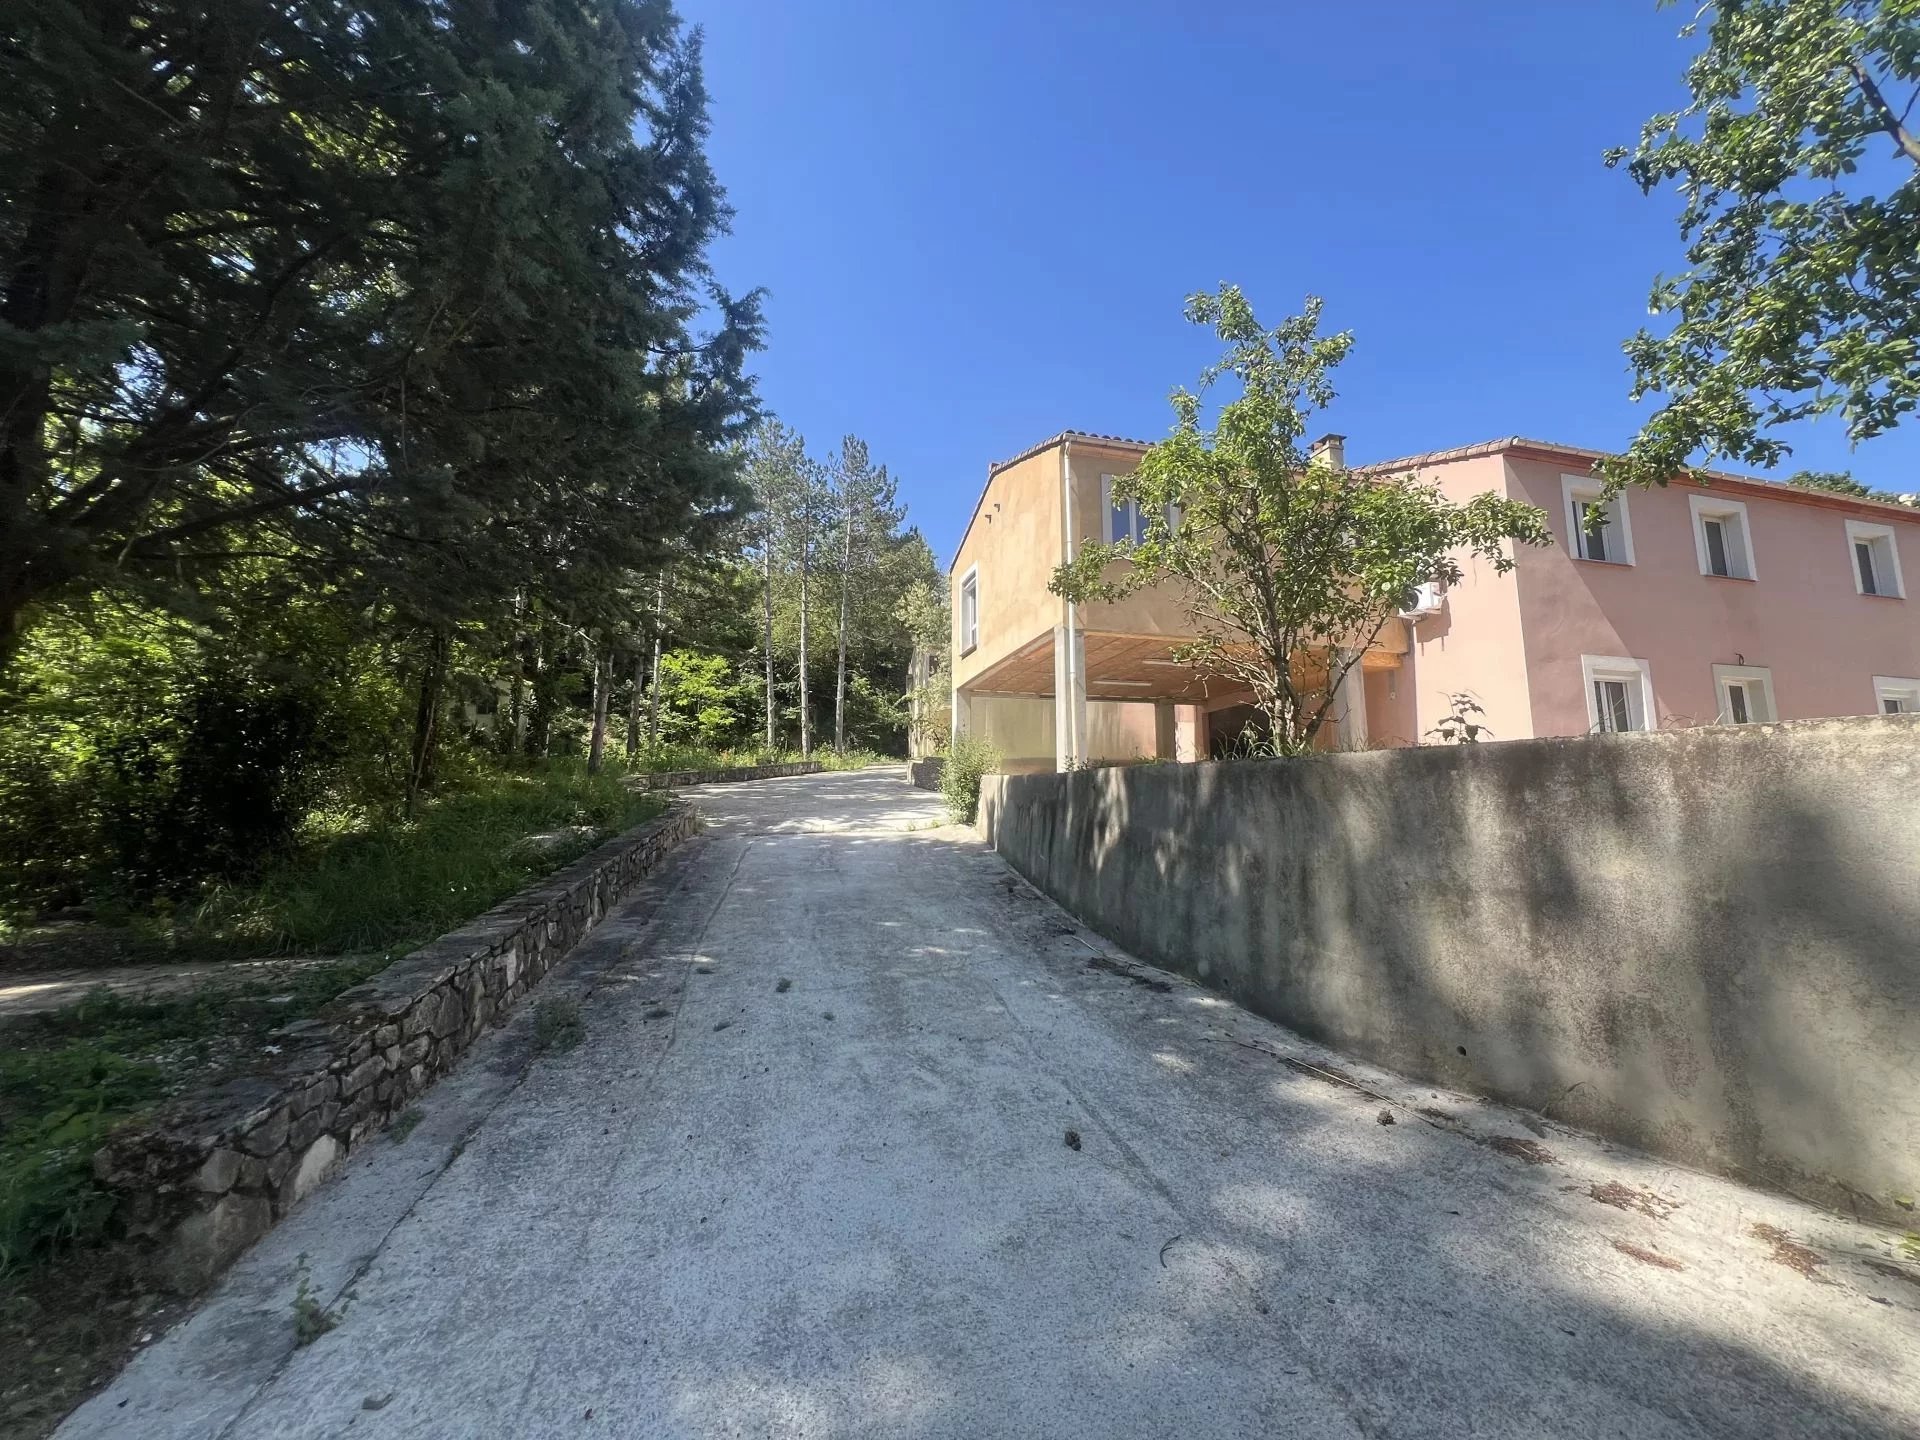 Close to Limoux, 5 bedroom house with garage, outbuildings, land and guest house